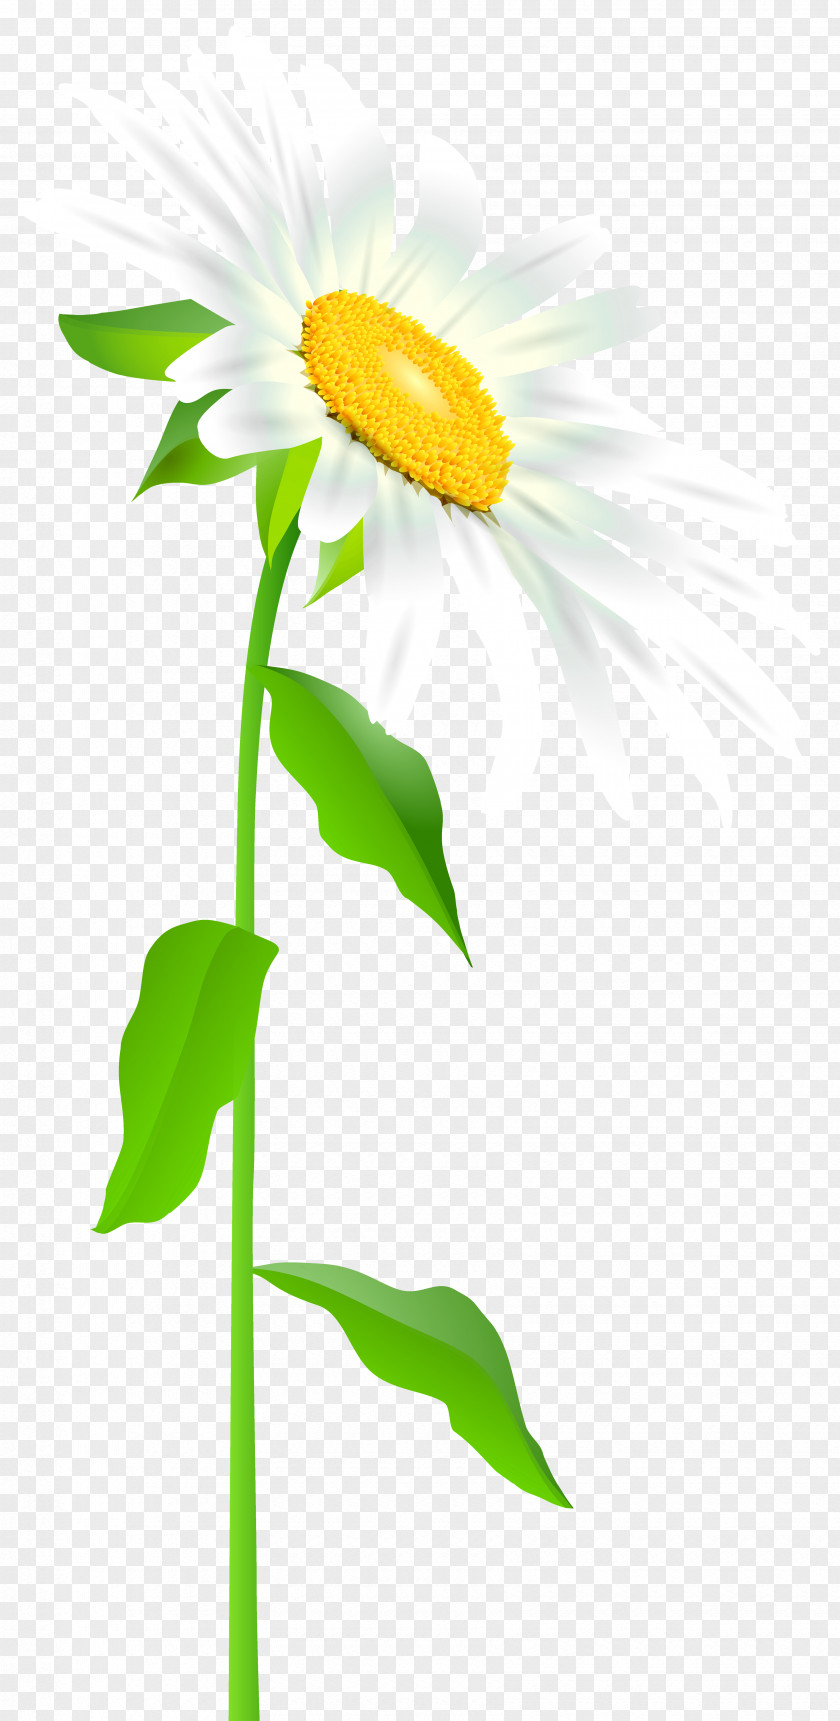 Daisy With Stem Transparent Clip Art Image Common Sunflower Text Leaf Illustration PNG